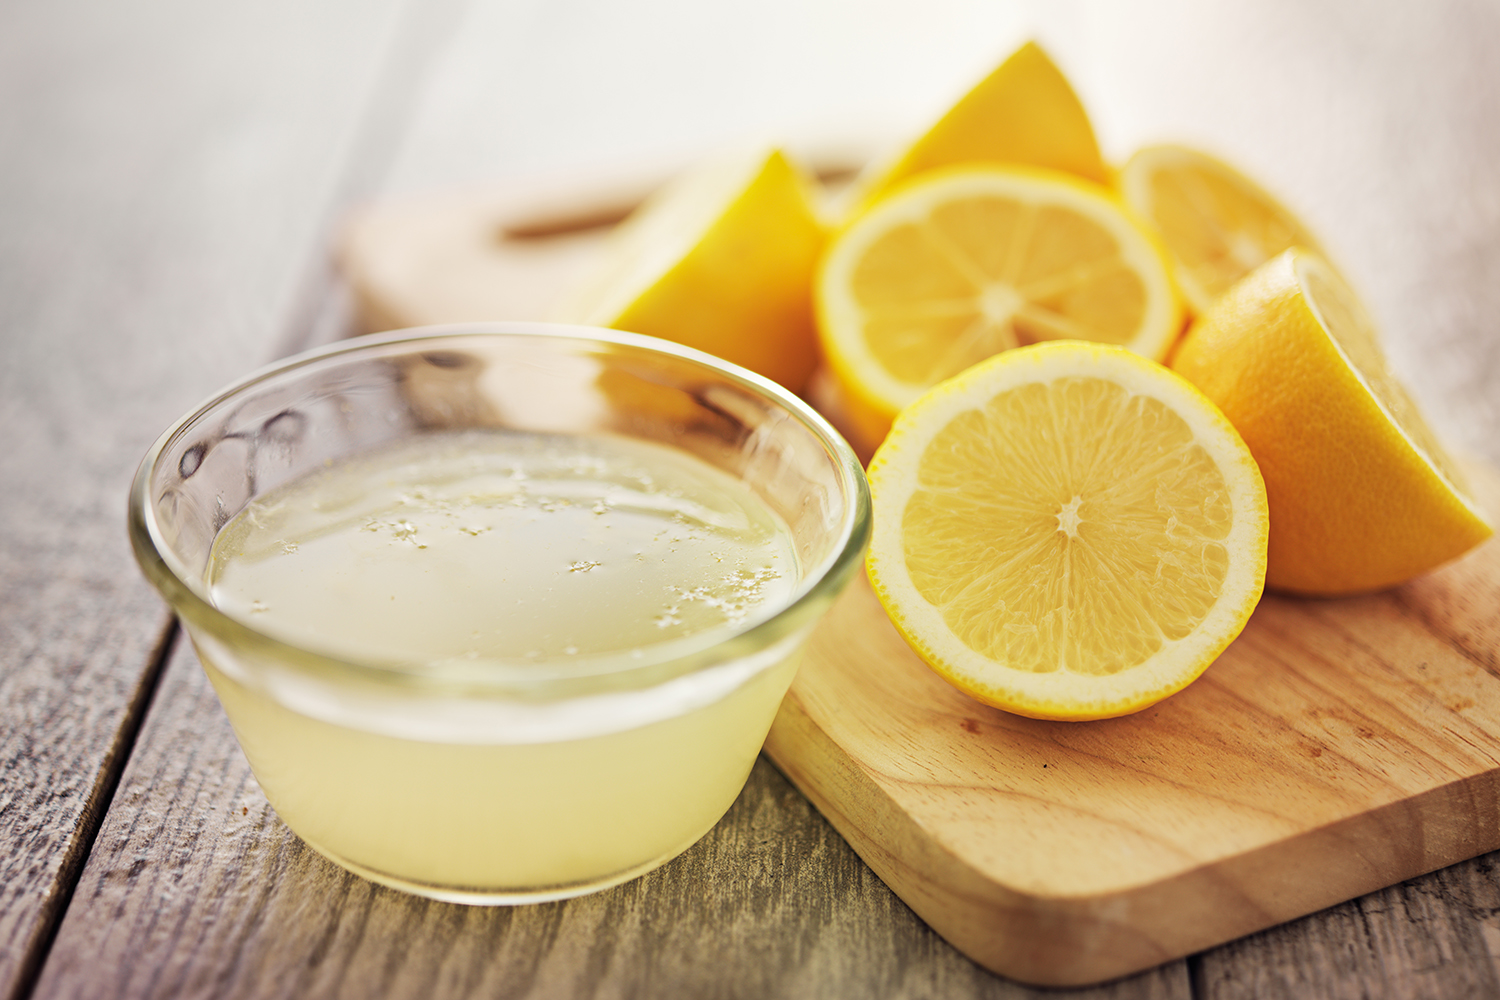 Lemon juice can help remove spray tan and other fake tans.